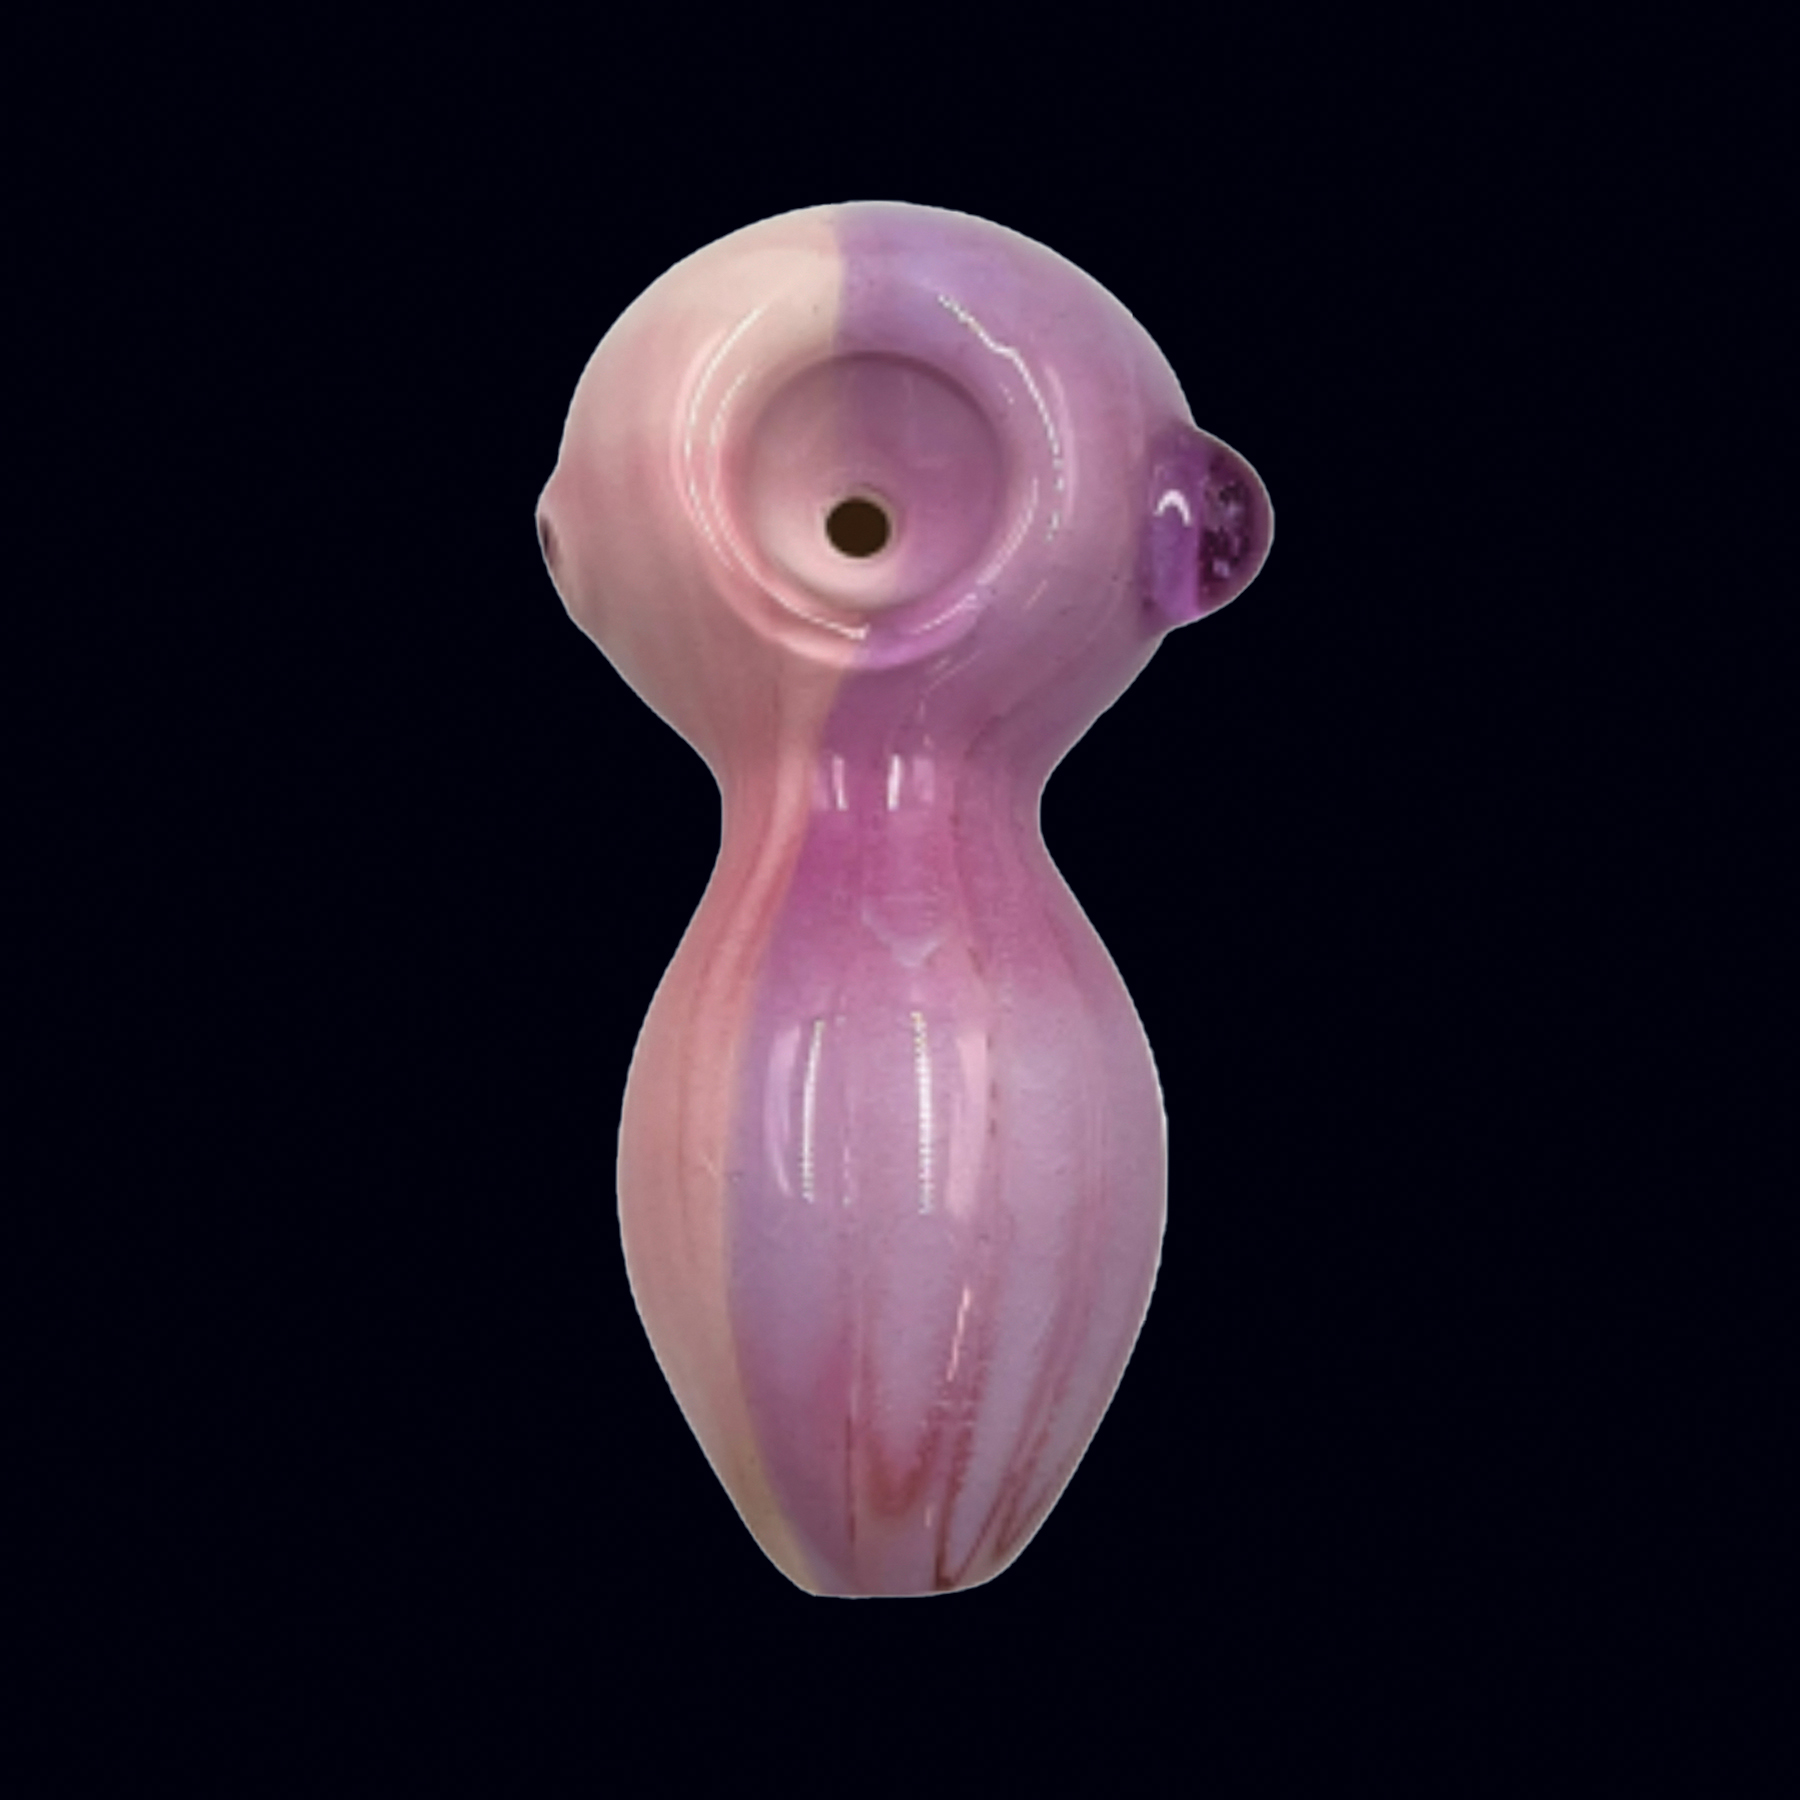 A pink glass figurine with a black background